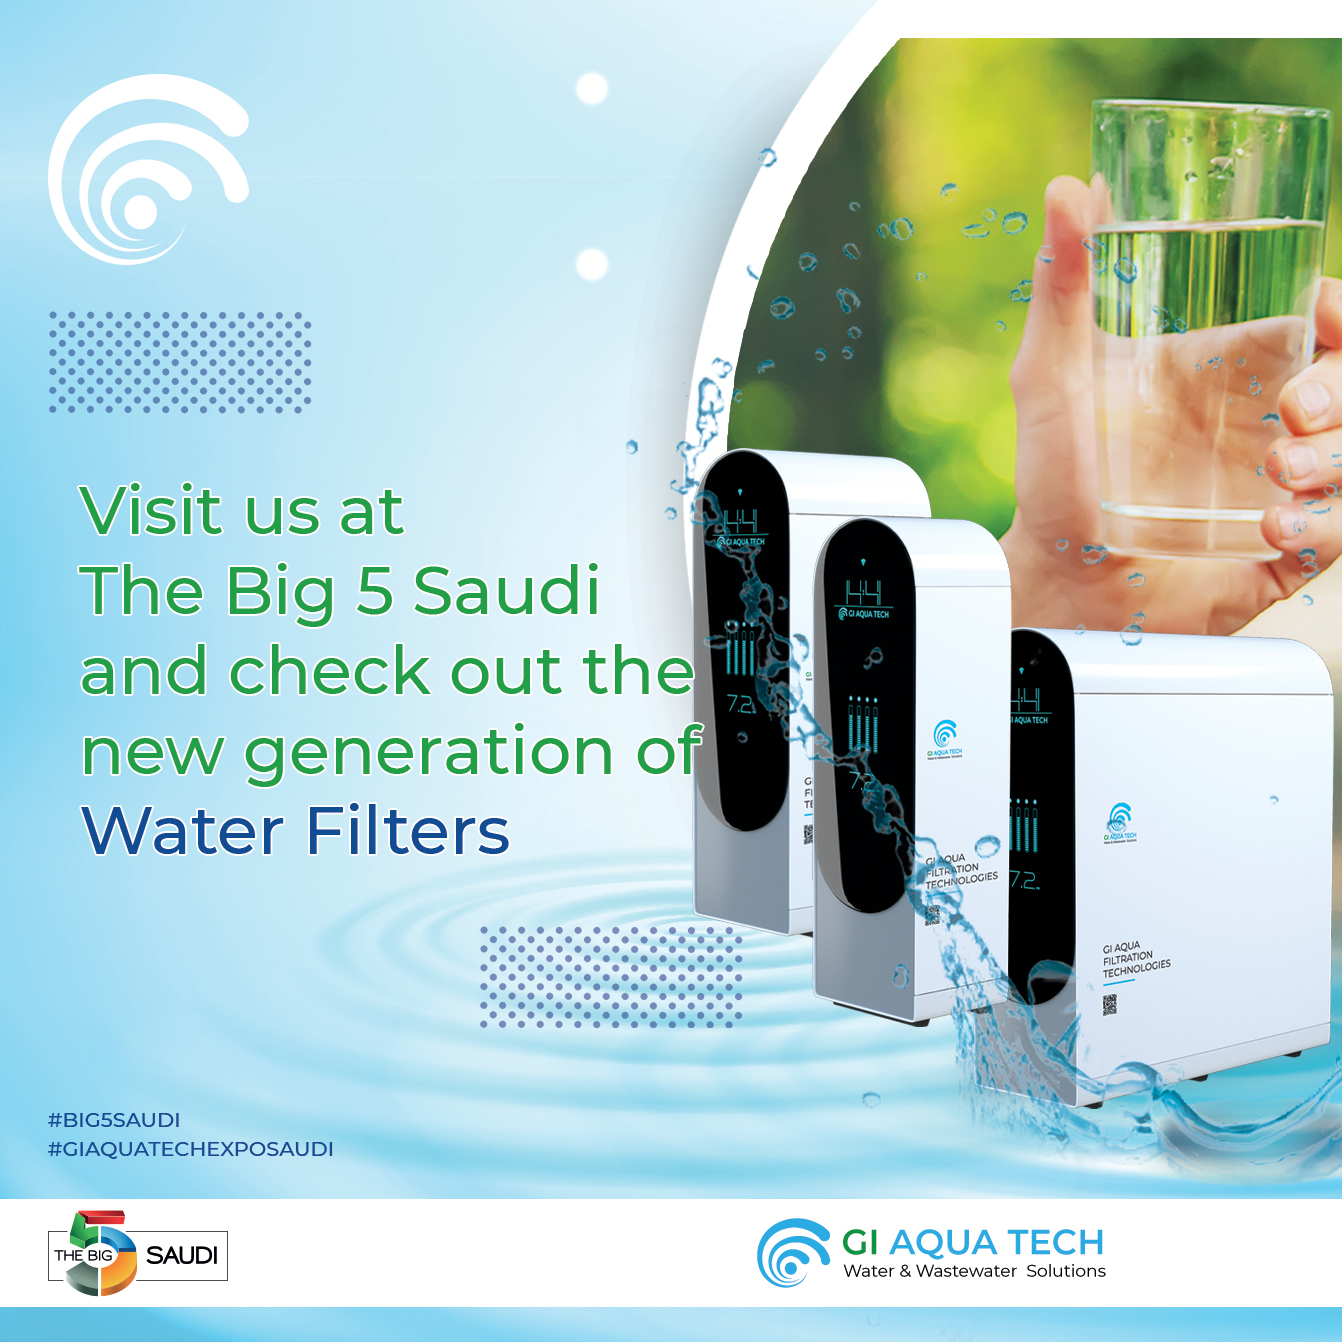 Our new generation water filters